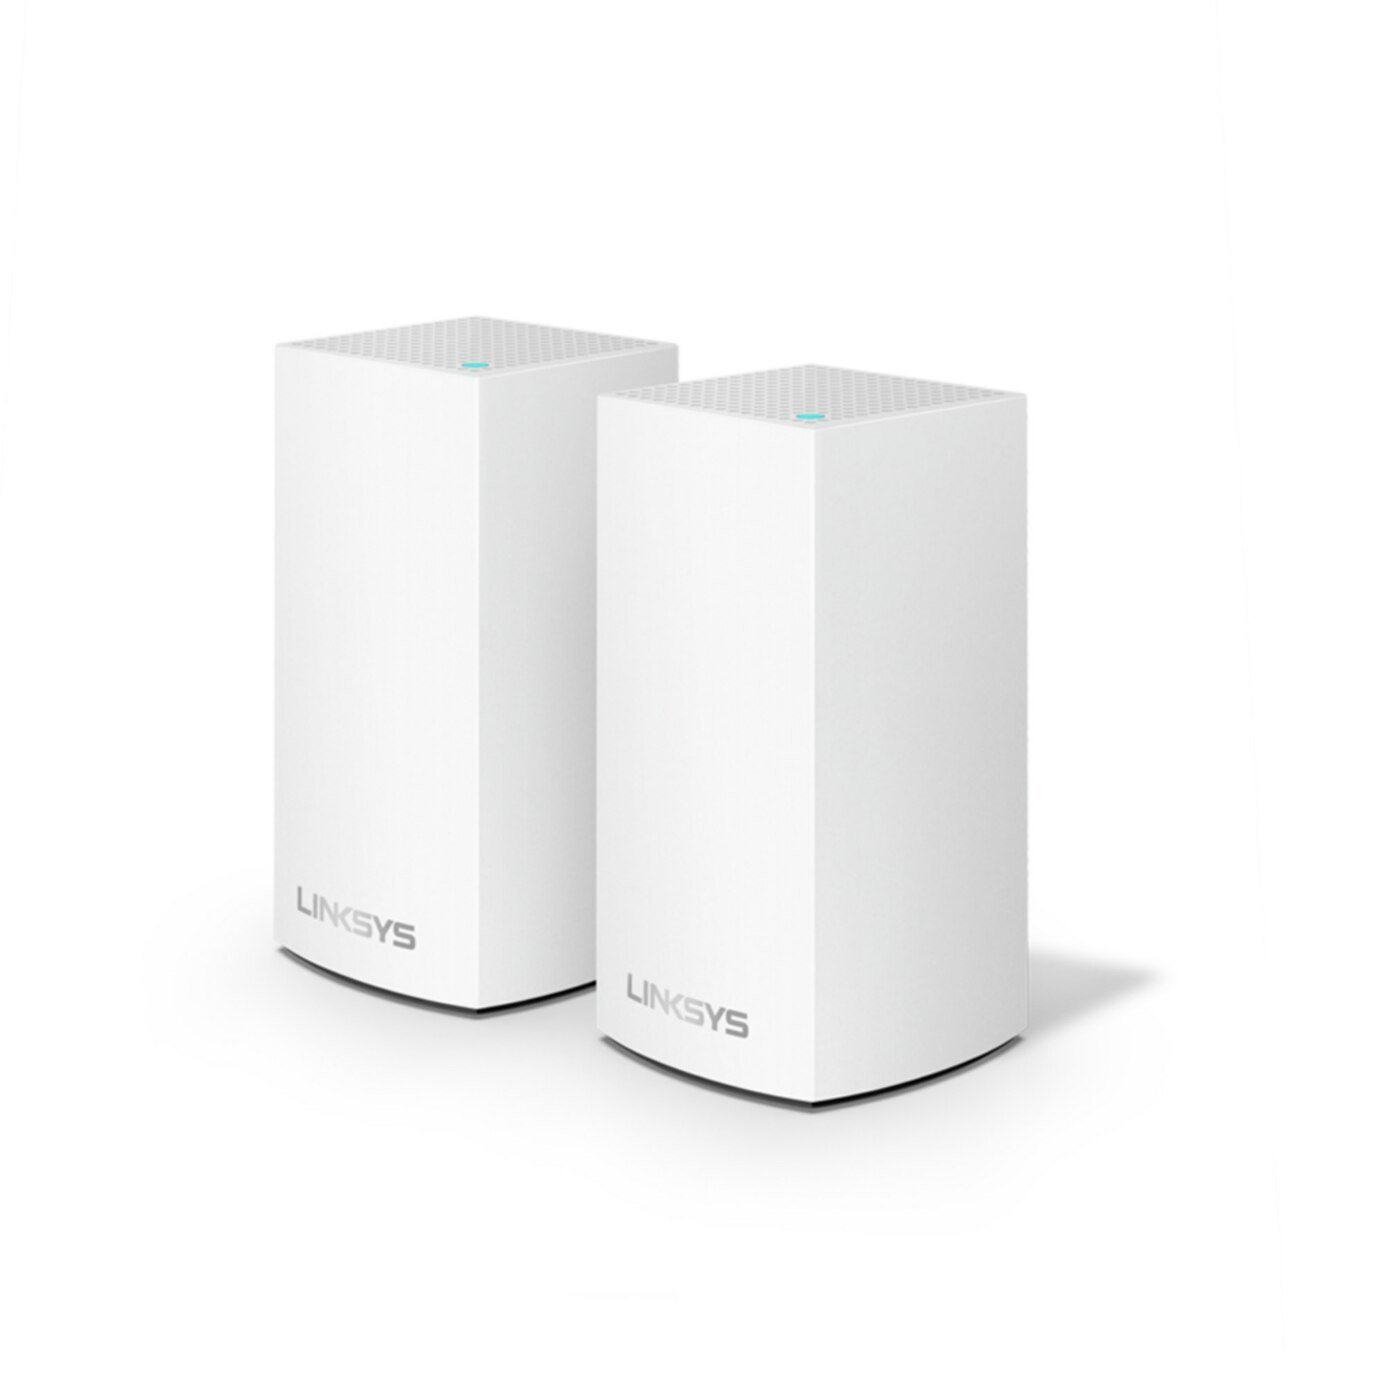 Linksys Velop AC2600 Whole Home Mesh Wi-Fi System 2-Pack Review